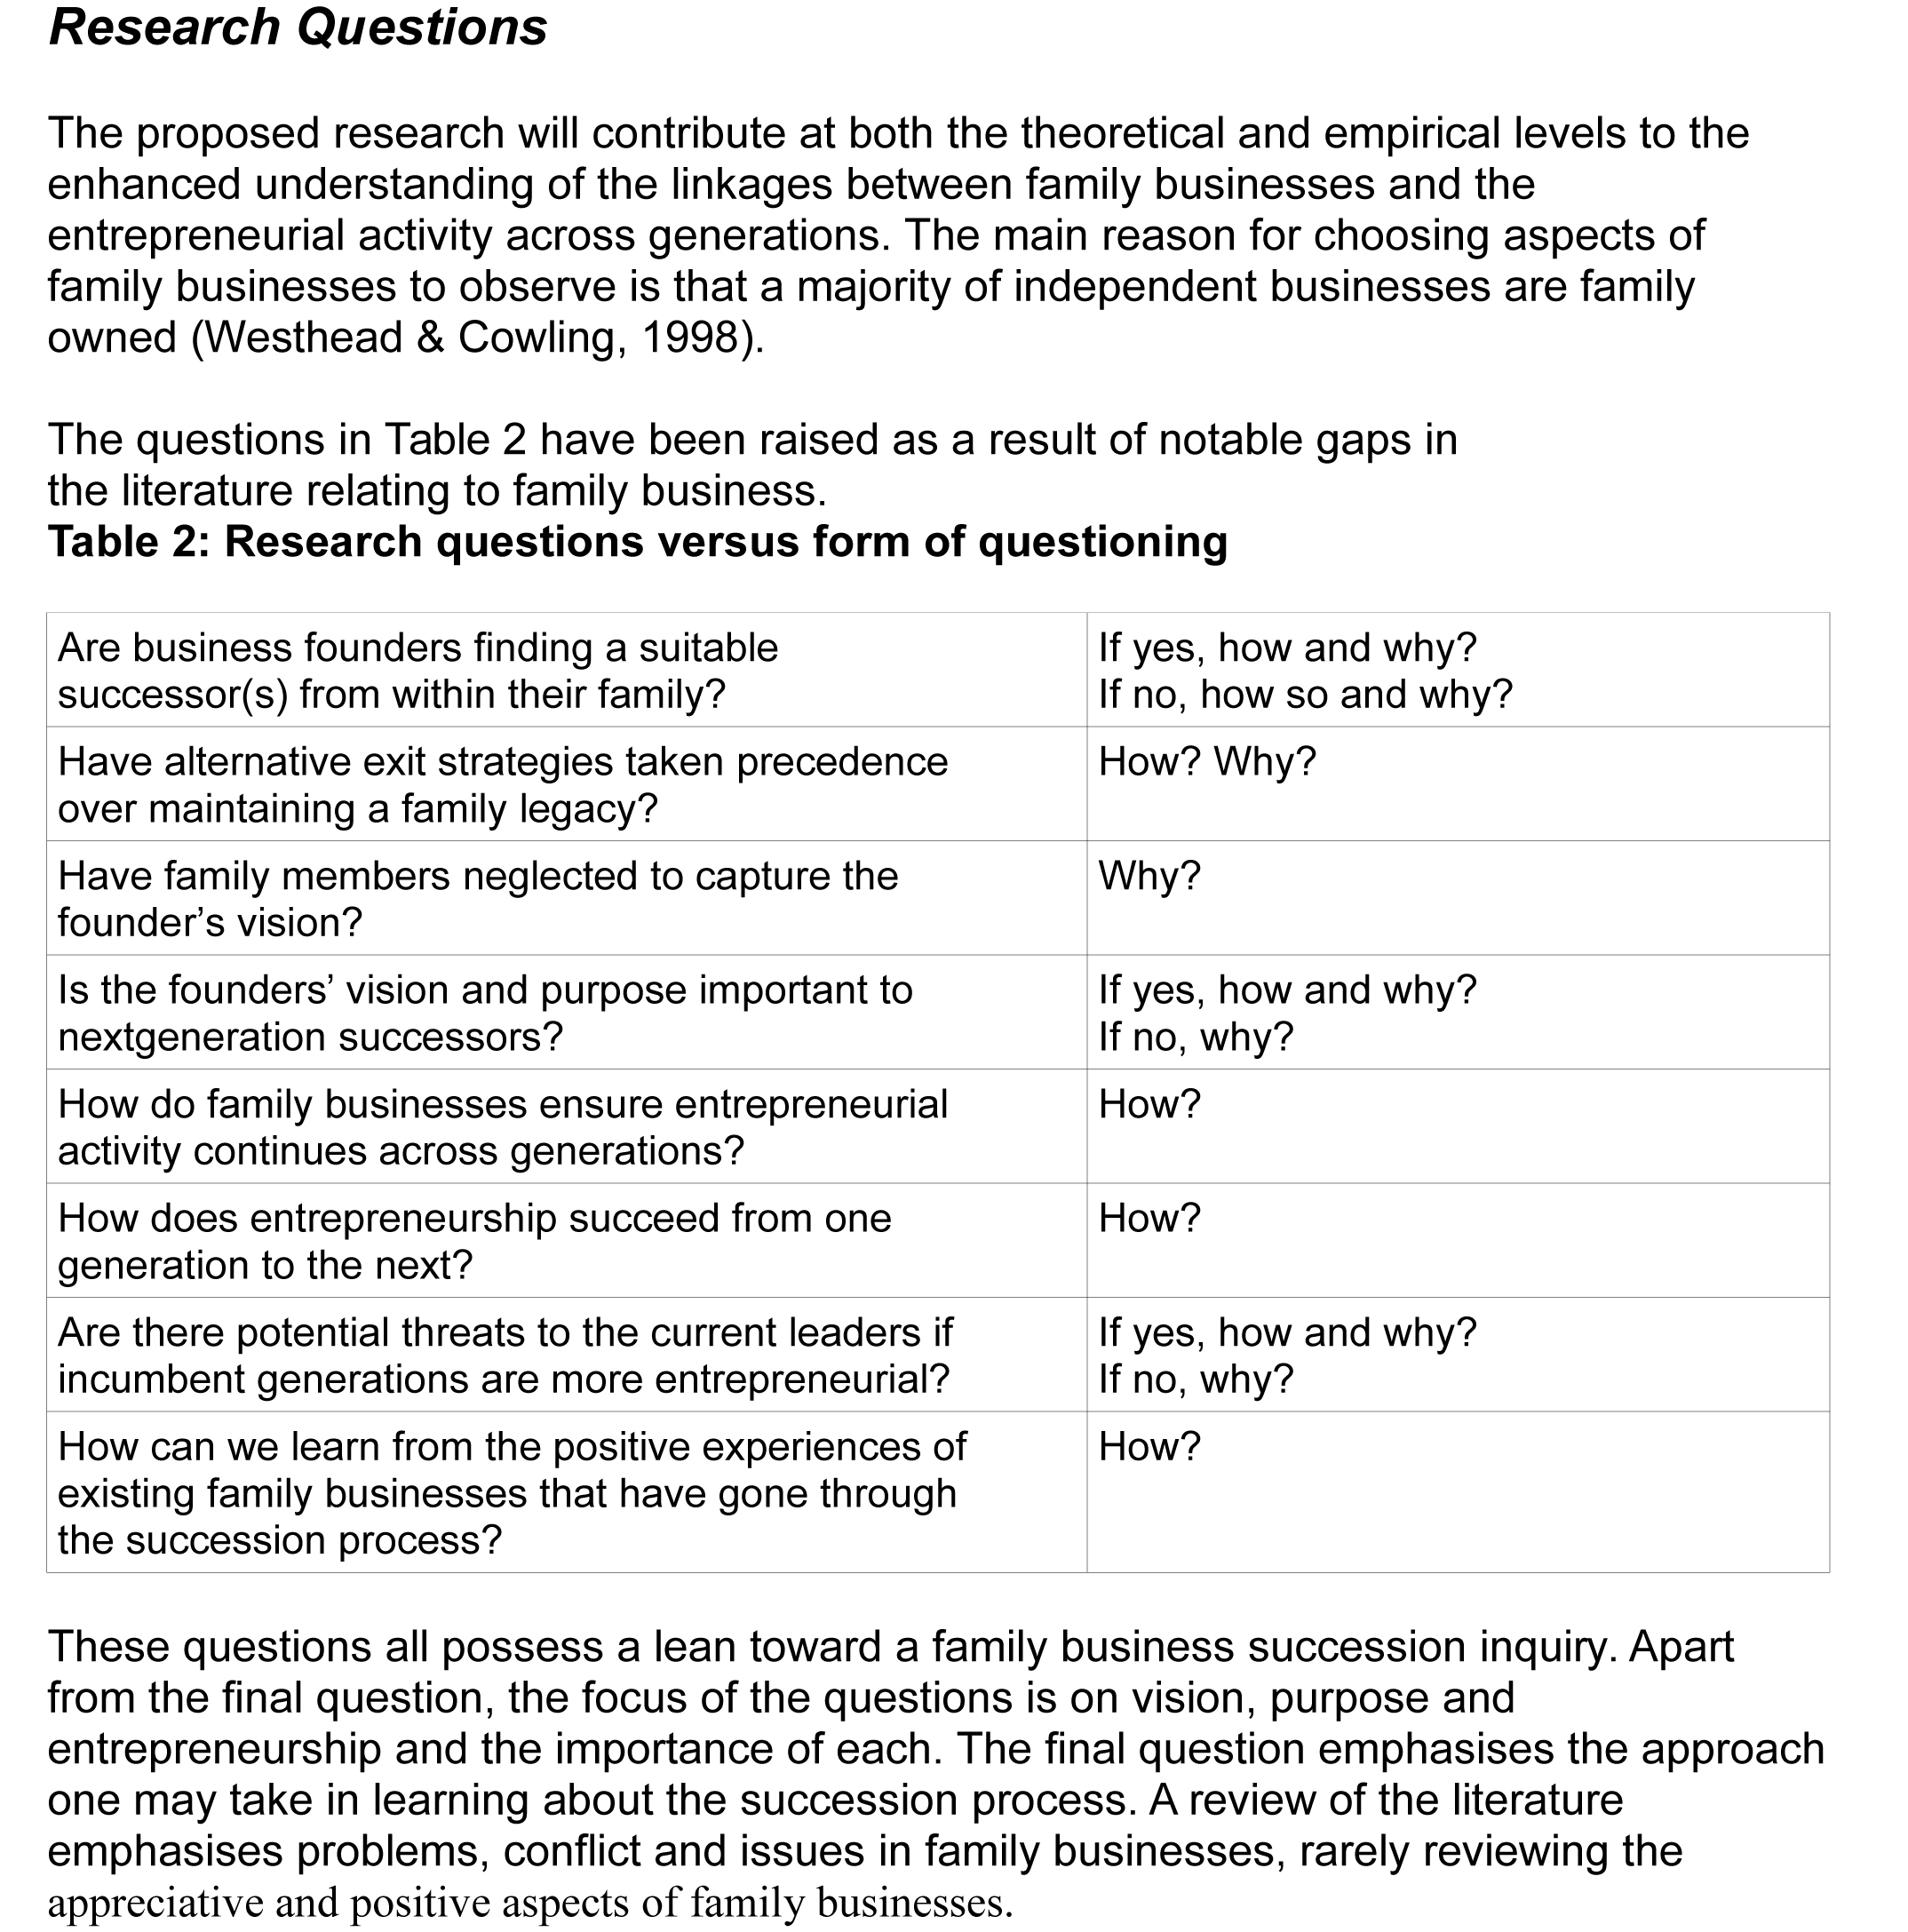 sample of research questions in research proposal